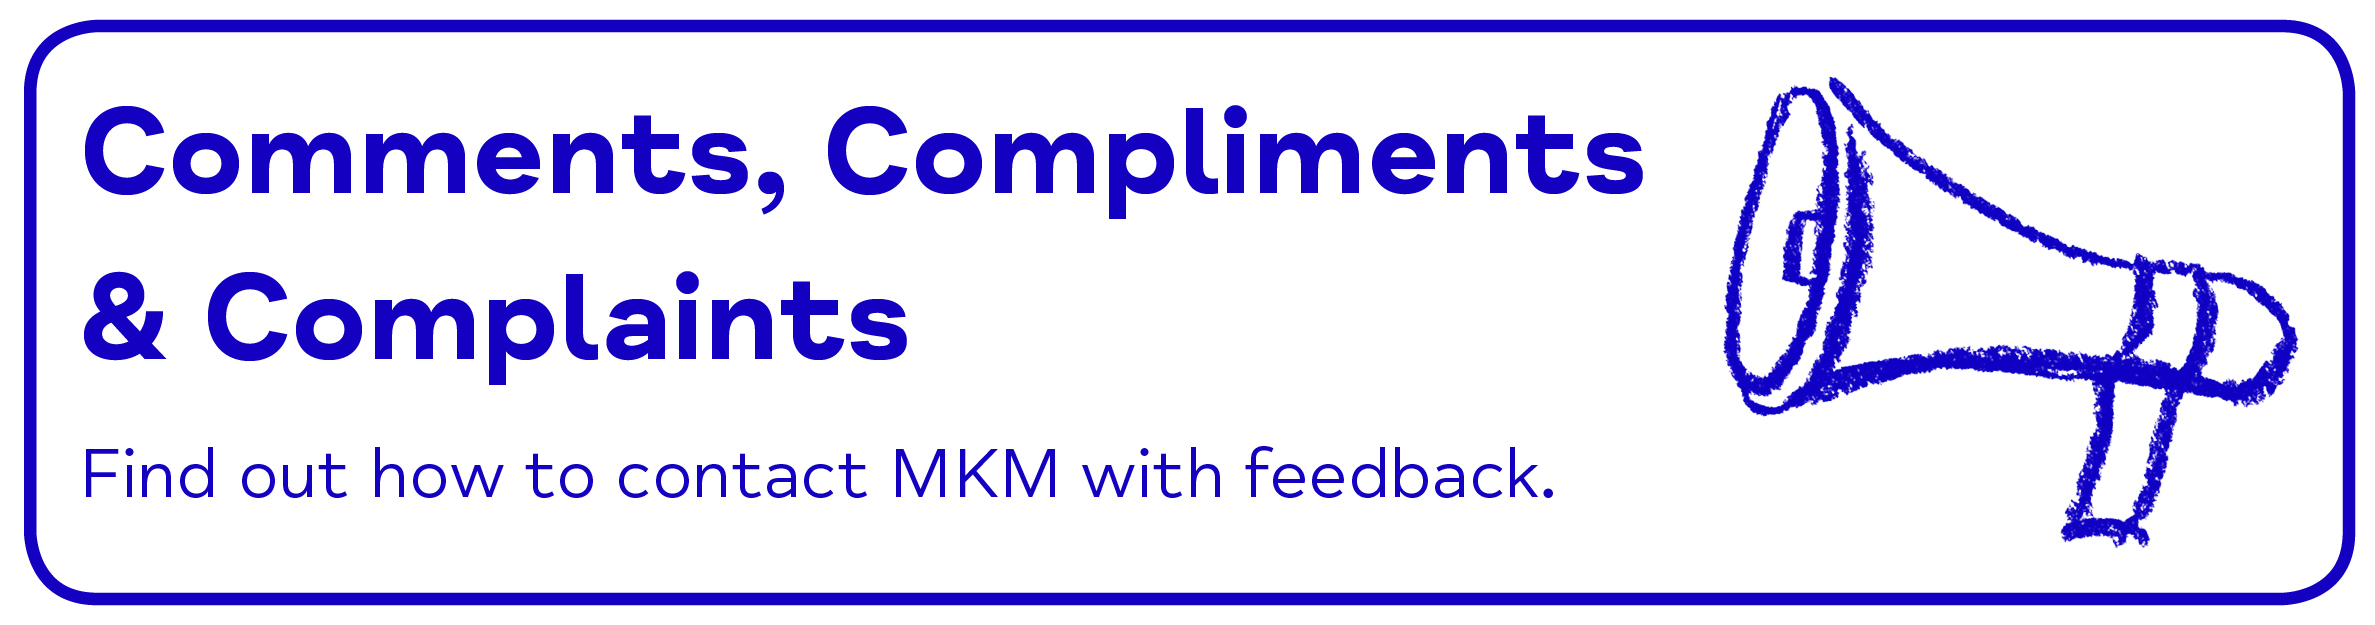 Comments & Complaints - Comments, Compliments & Complaints Find out how to contact MKM with feedback. 